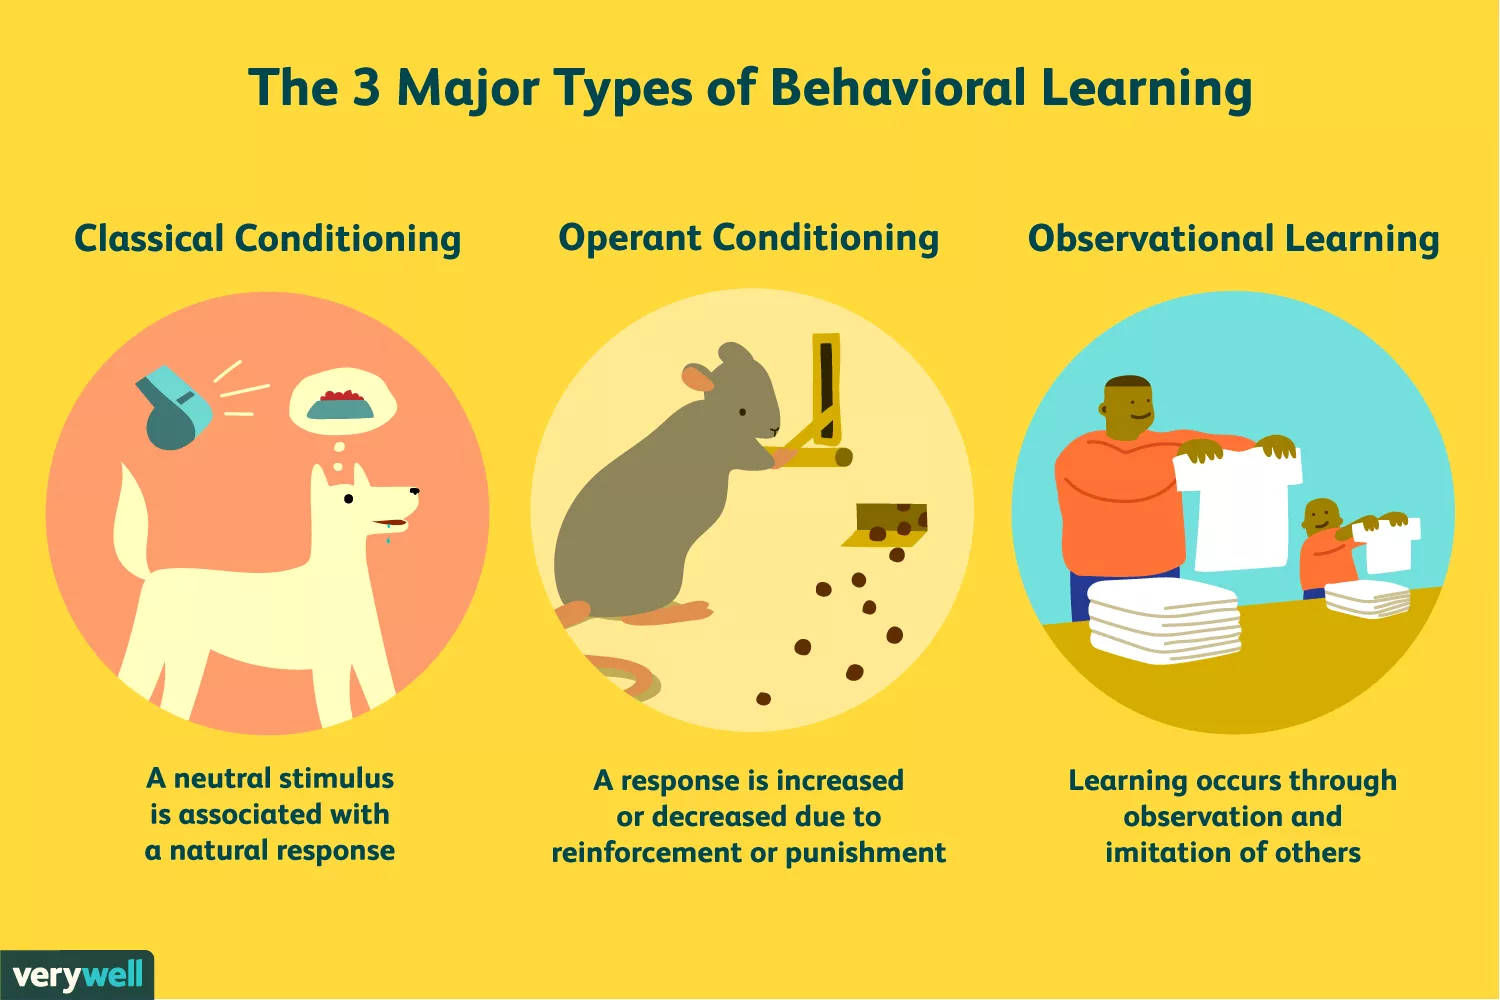 The 3 major types of behavioral learning